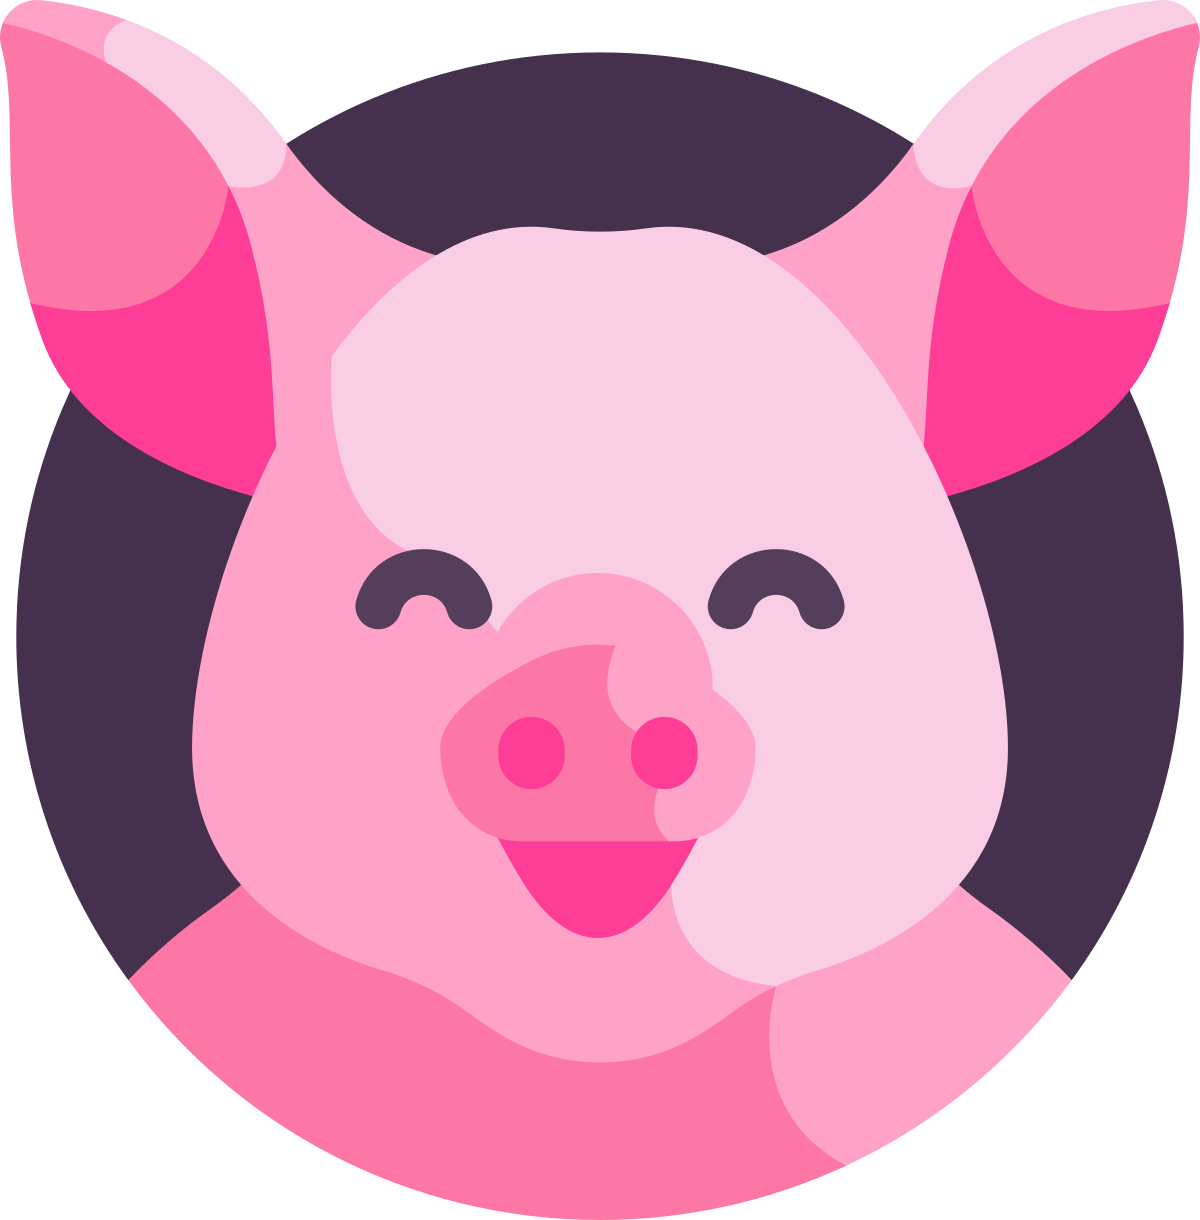 The Chinese horoscope for Pig